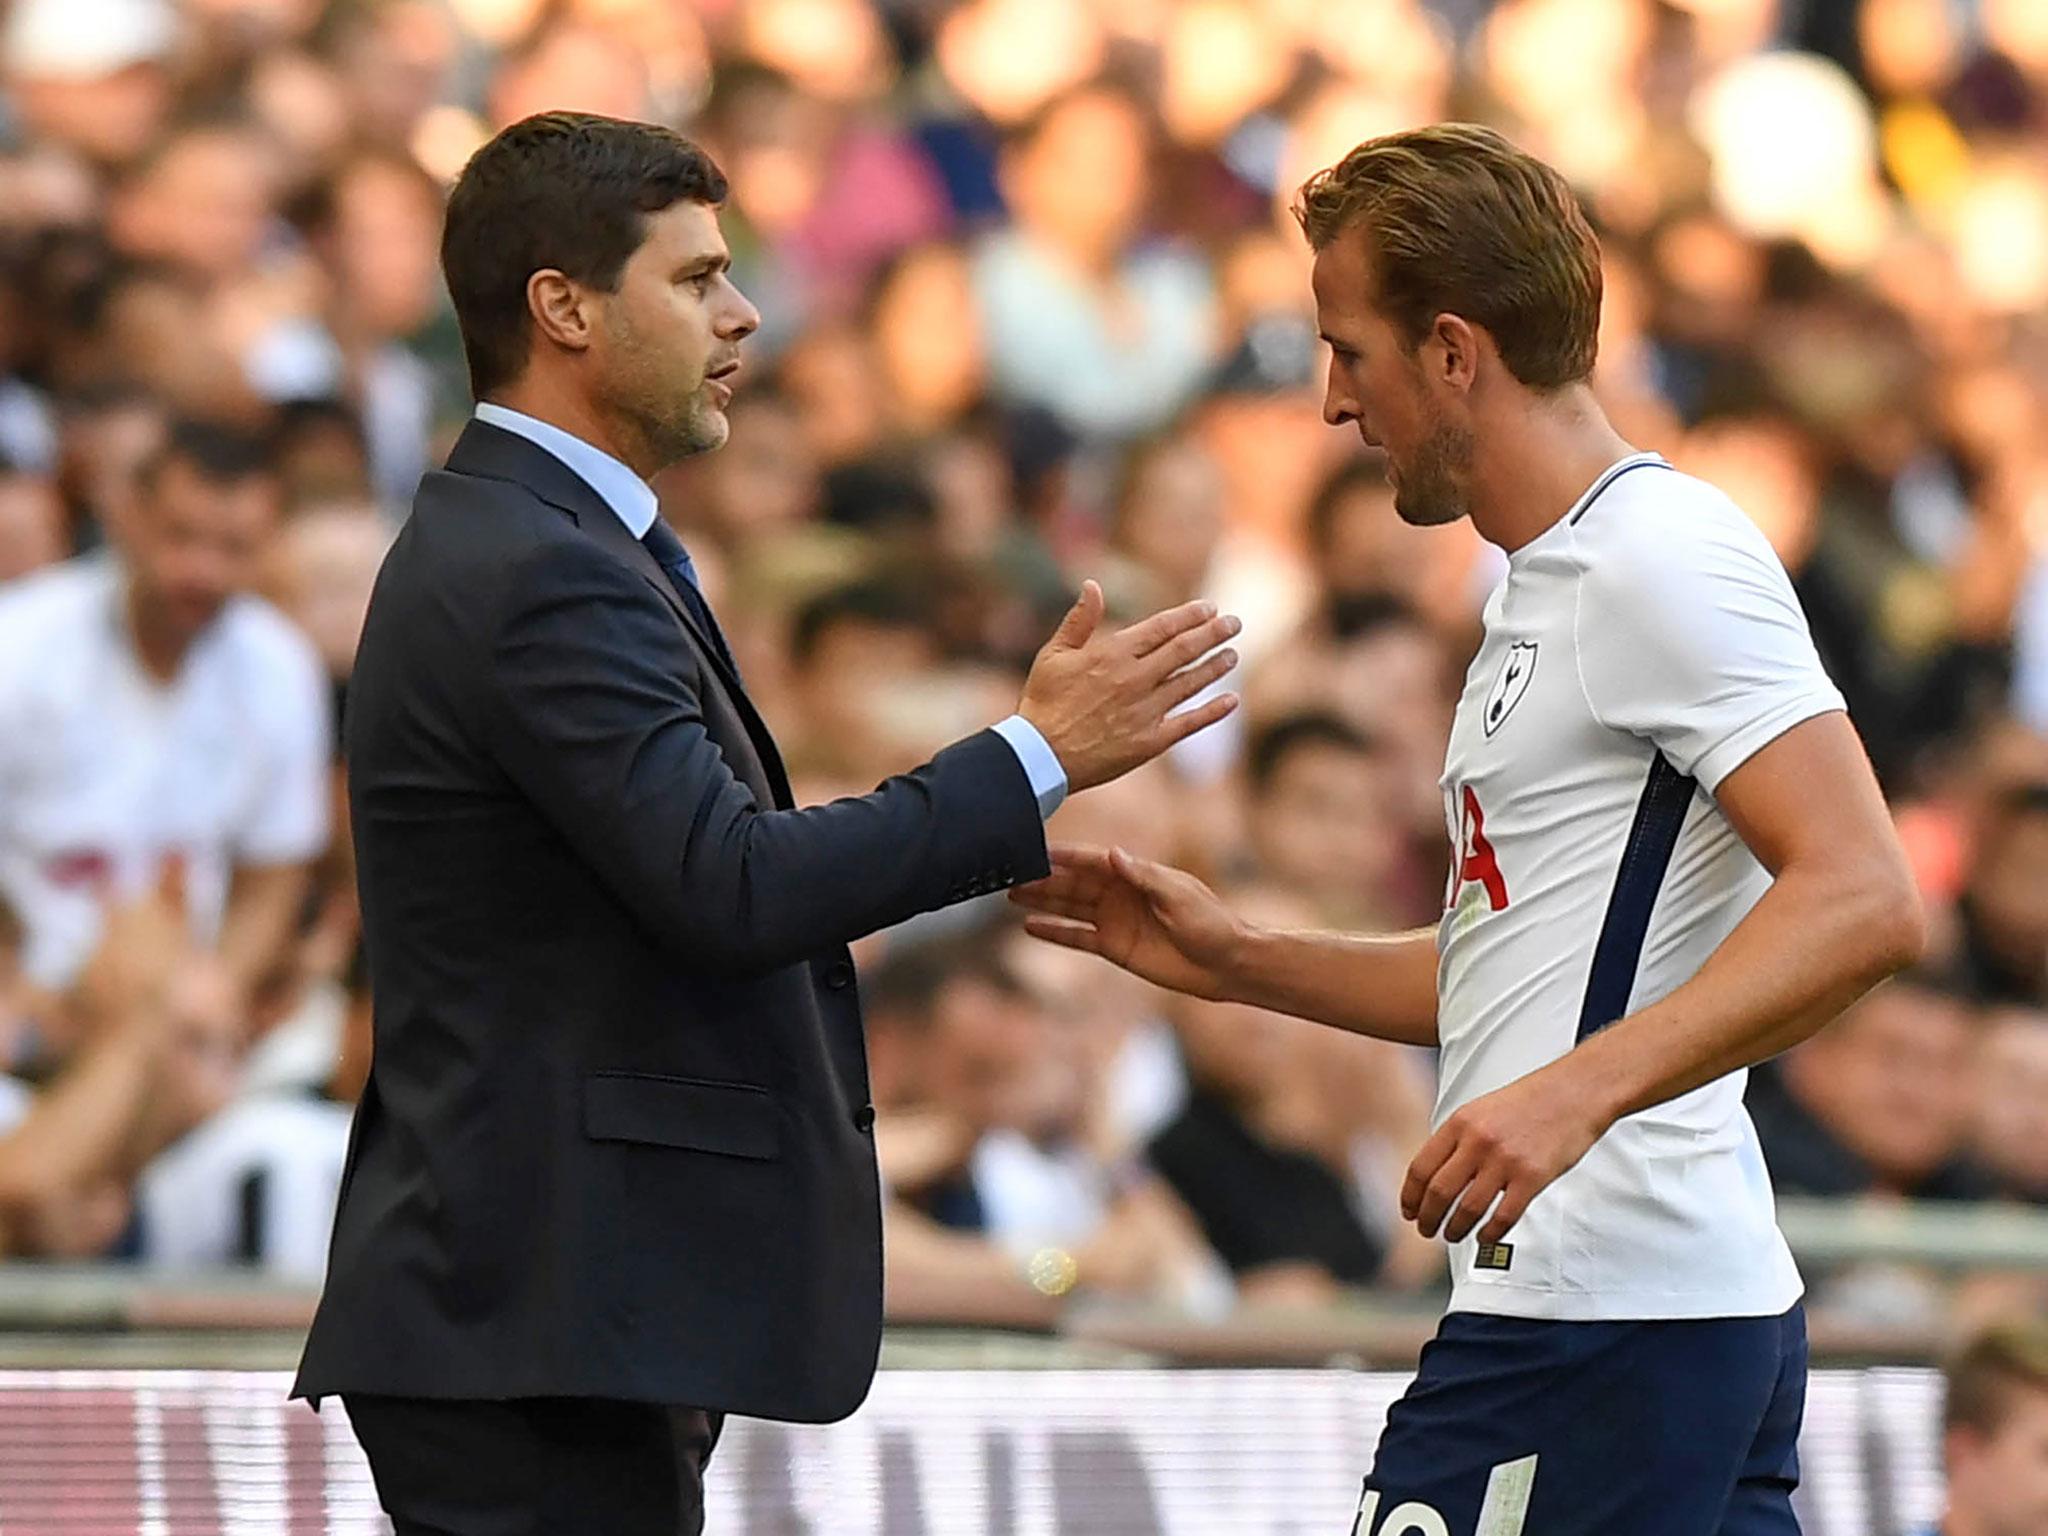 Mauricio Pochettino has praised Harry Kane as one of the game's best forwards